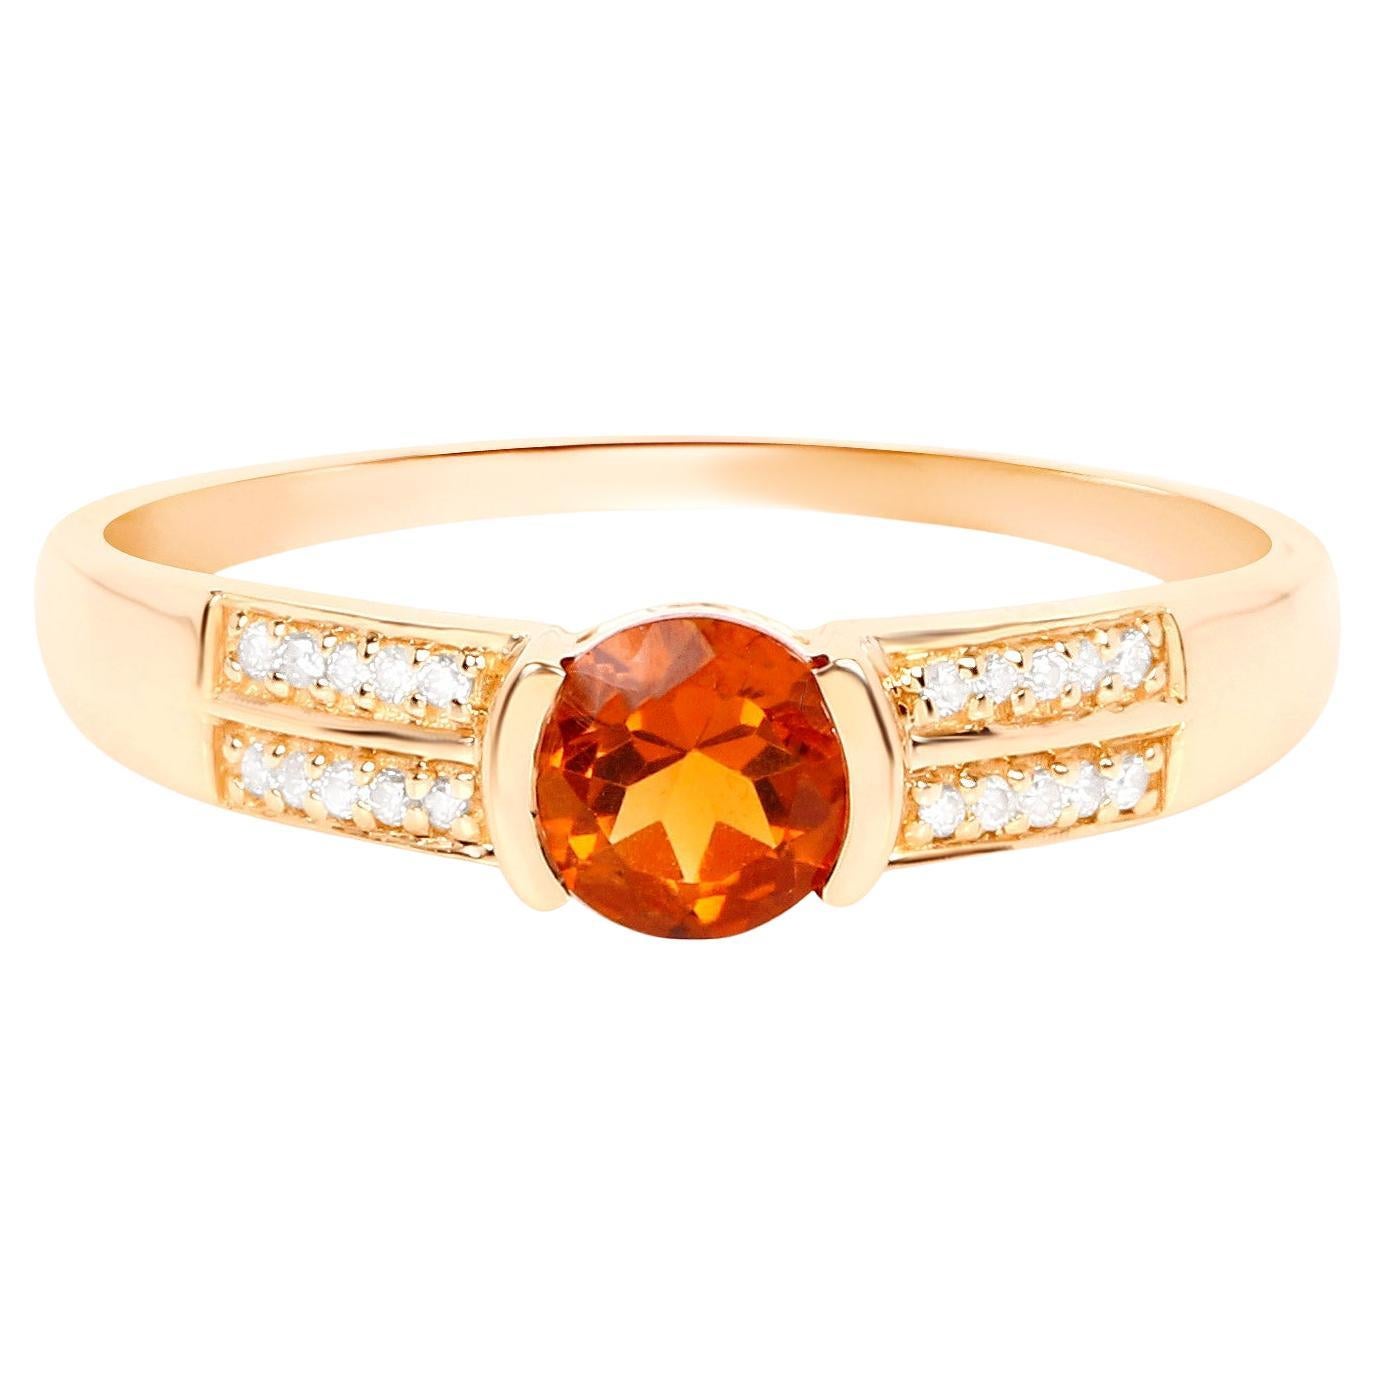 Citrine Solitaire Ring Diamond Setting 0.55 Carats 14K Gold